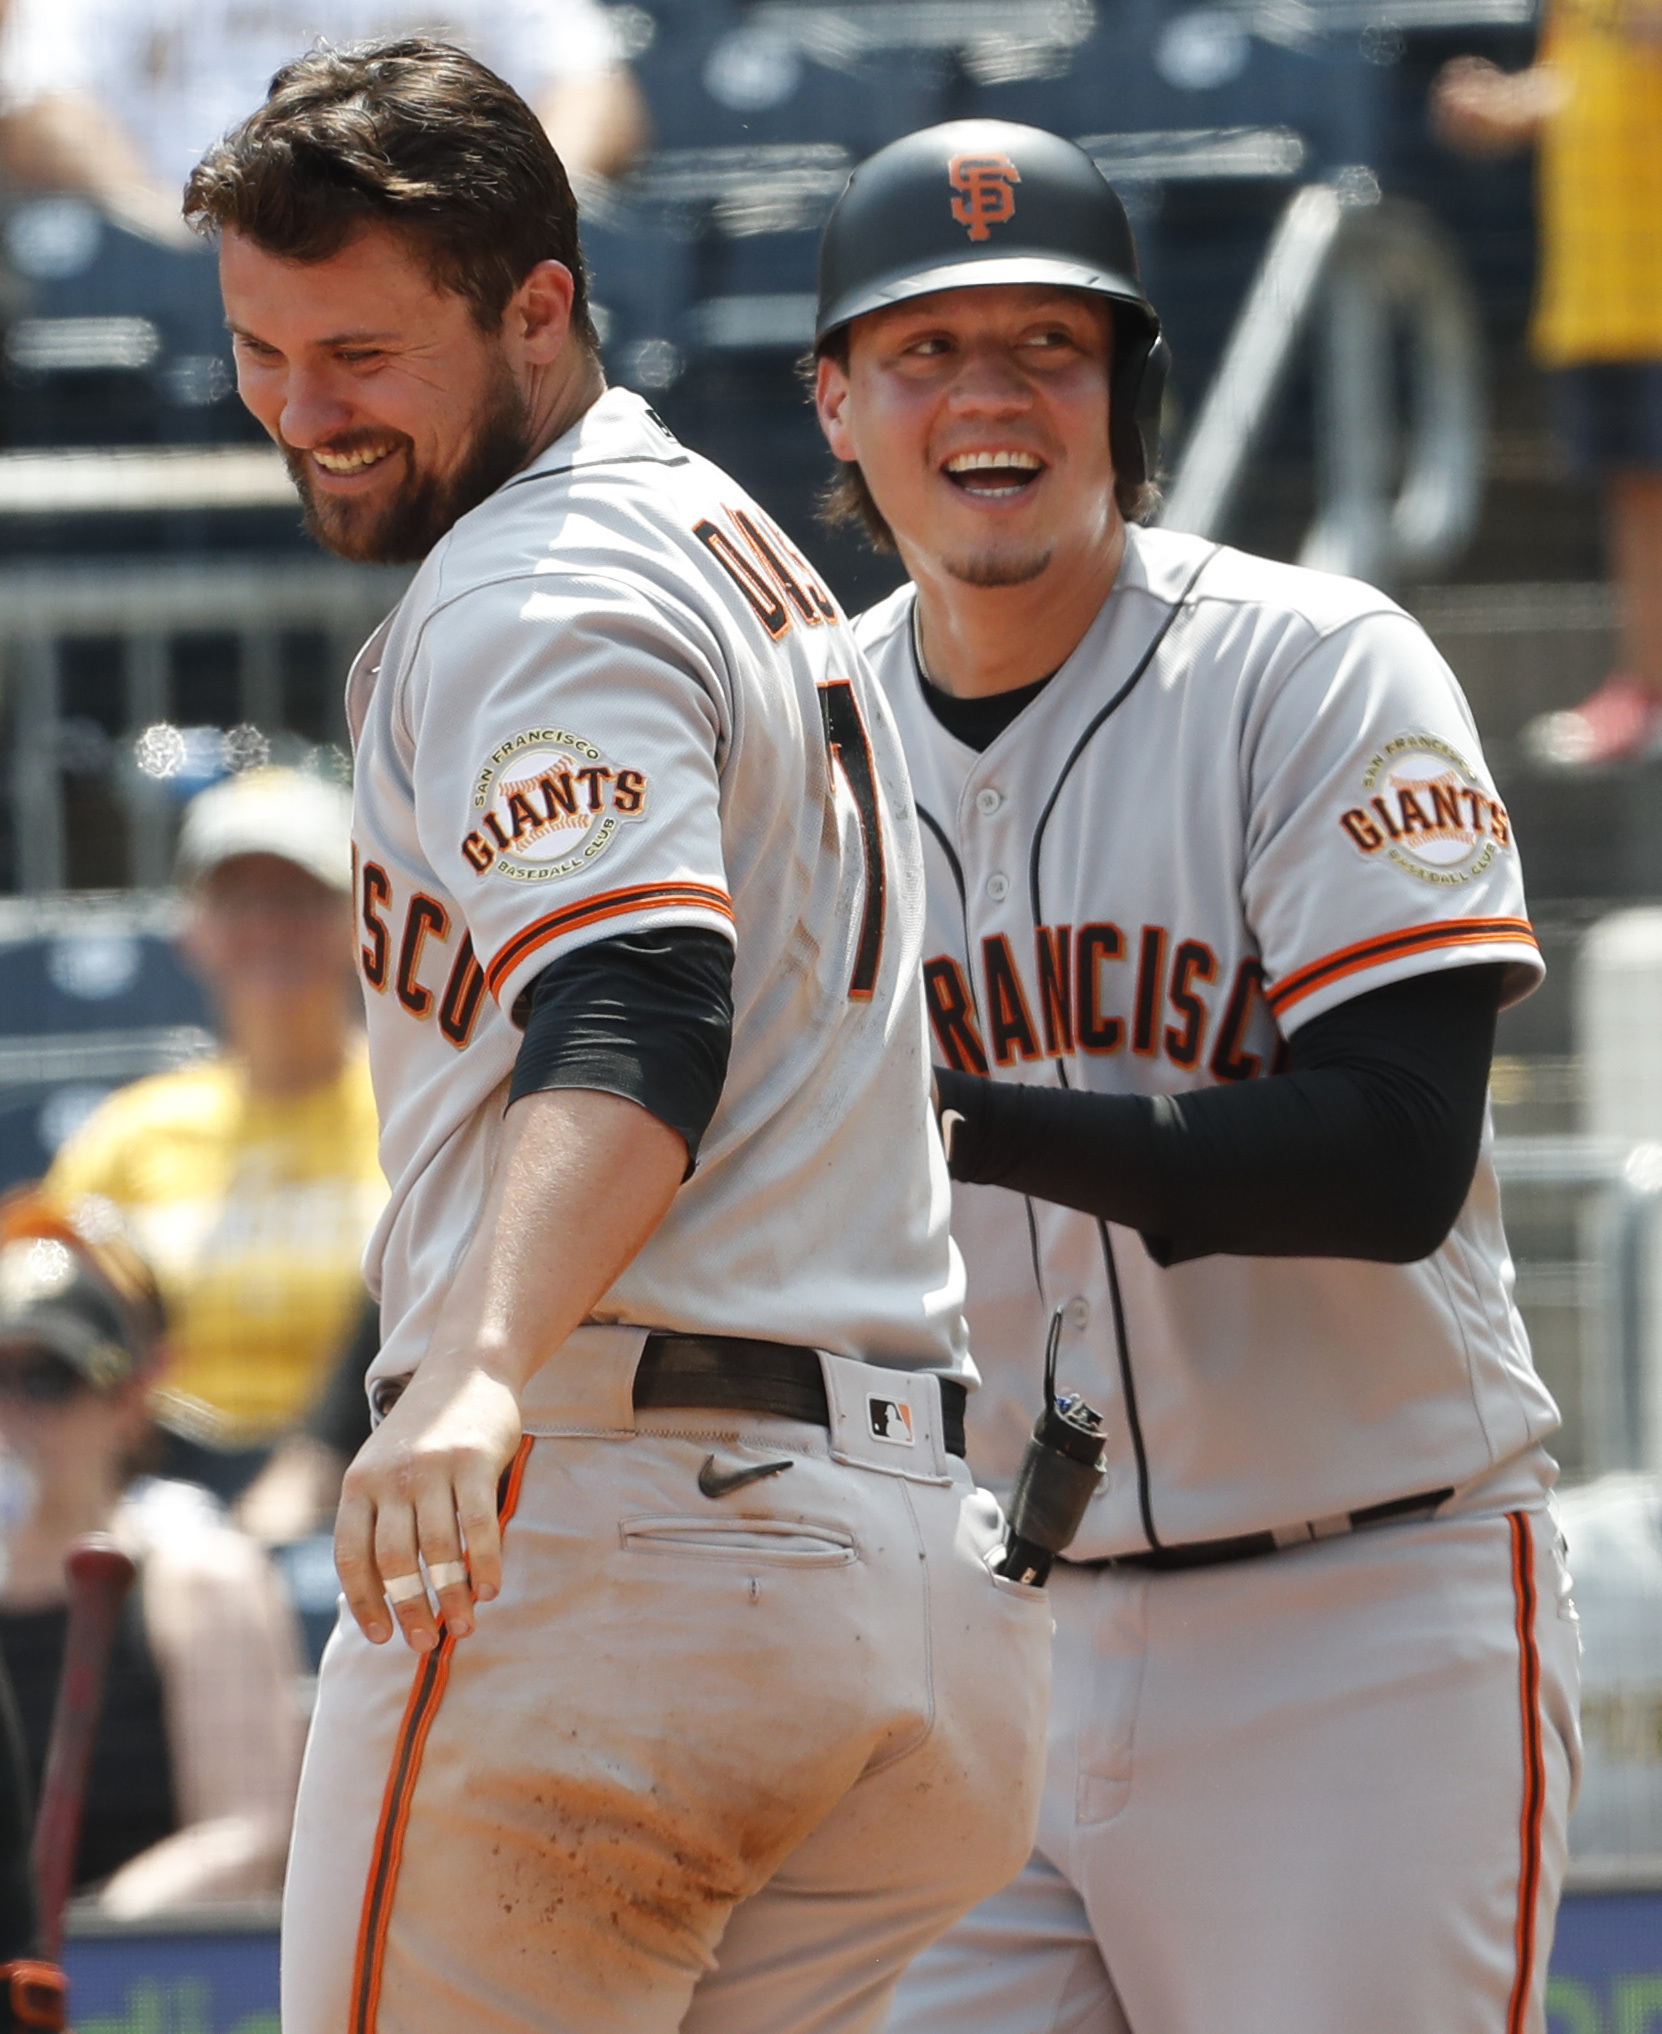 Giants score 5 runs in 10th for series sweep as Pirates continue